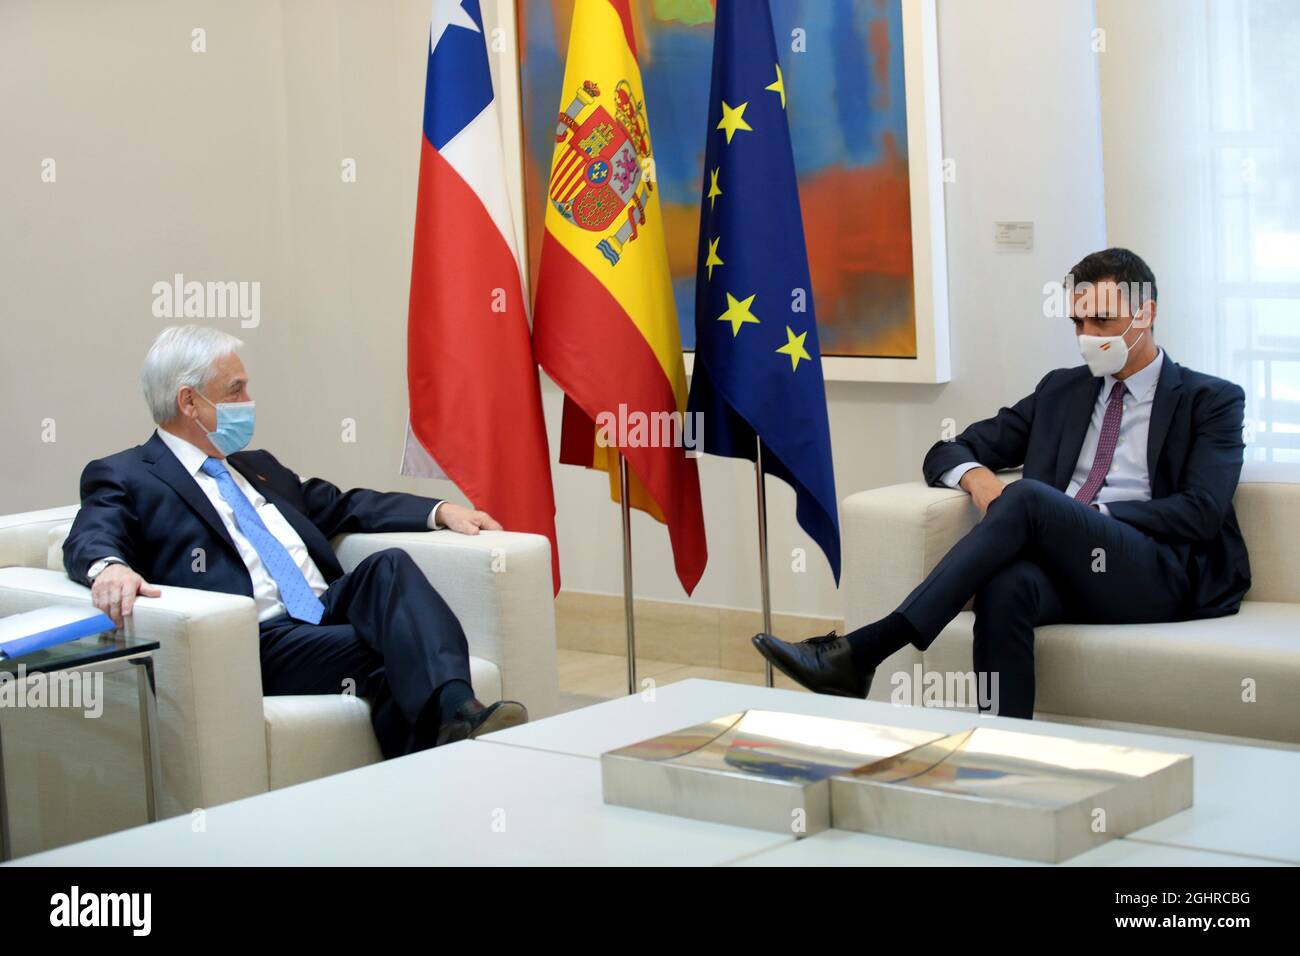 Madrid Spain; 07.09.2021.- President of Chile, Sebastián Piñera, receives  his Spanish counterpart Pedro Sánchez at the Moncloa Palace, during a tour  of Europe and his visit to Spain, and they have lunch